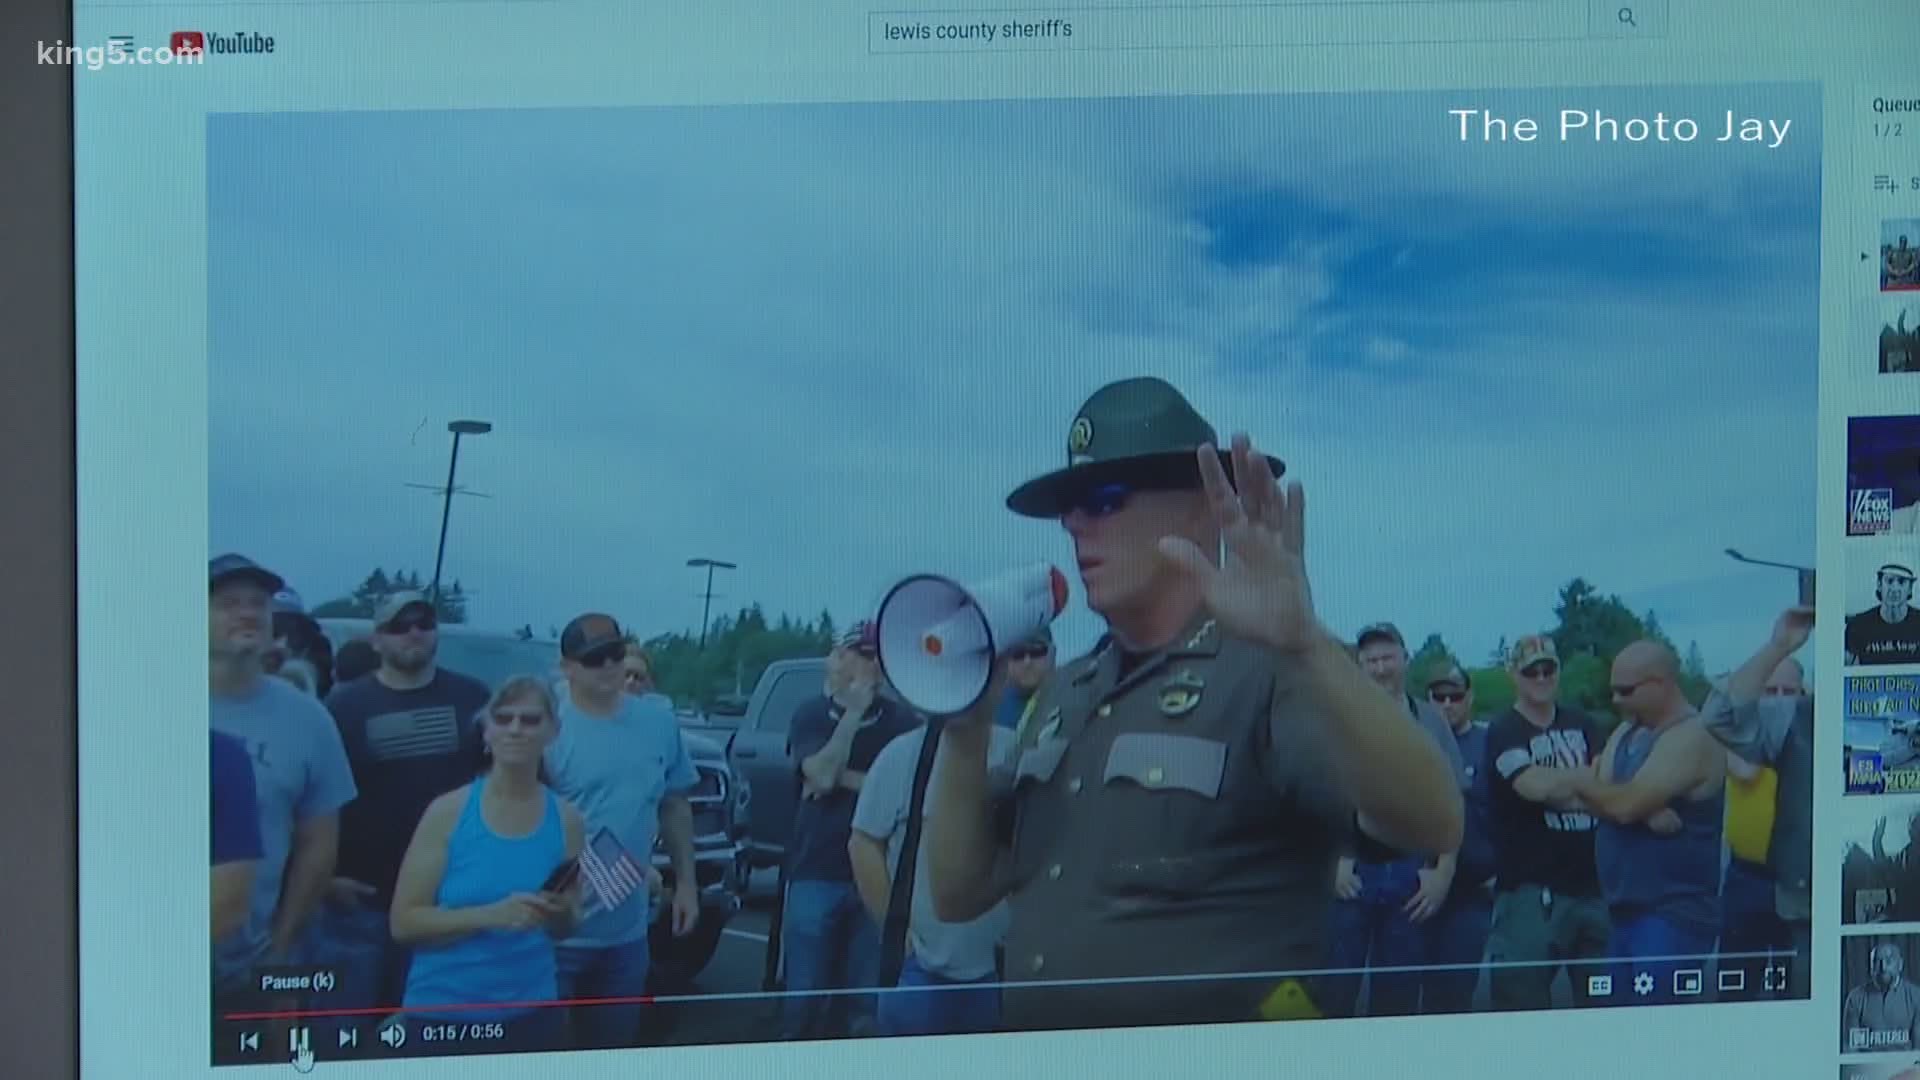 After Gov. Jay Inslee's announcement of a statewide order to wear masks in public, several Washington sheriffs are weighing in on enforcement.